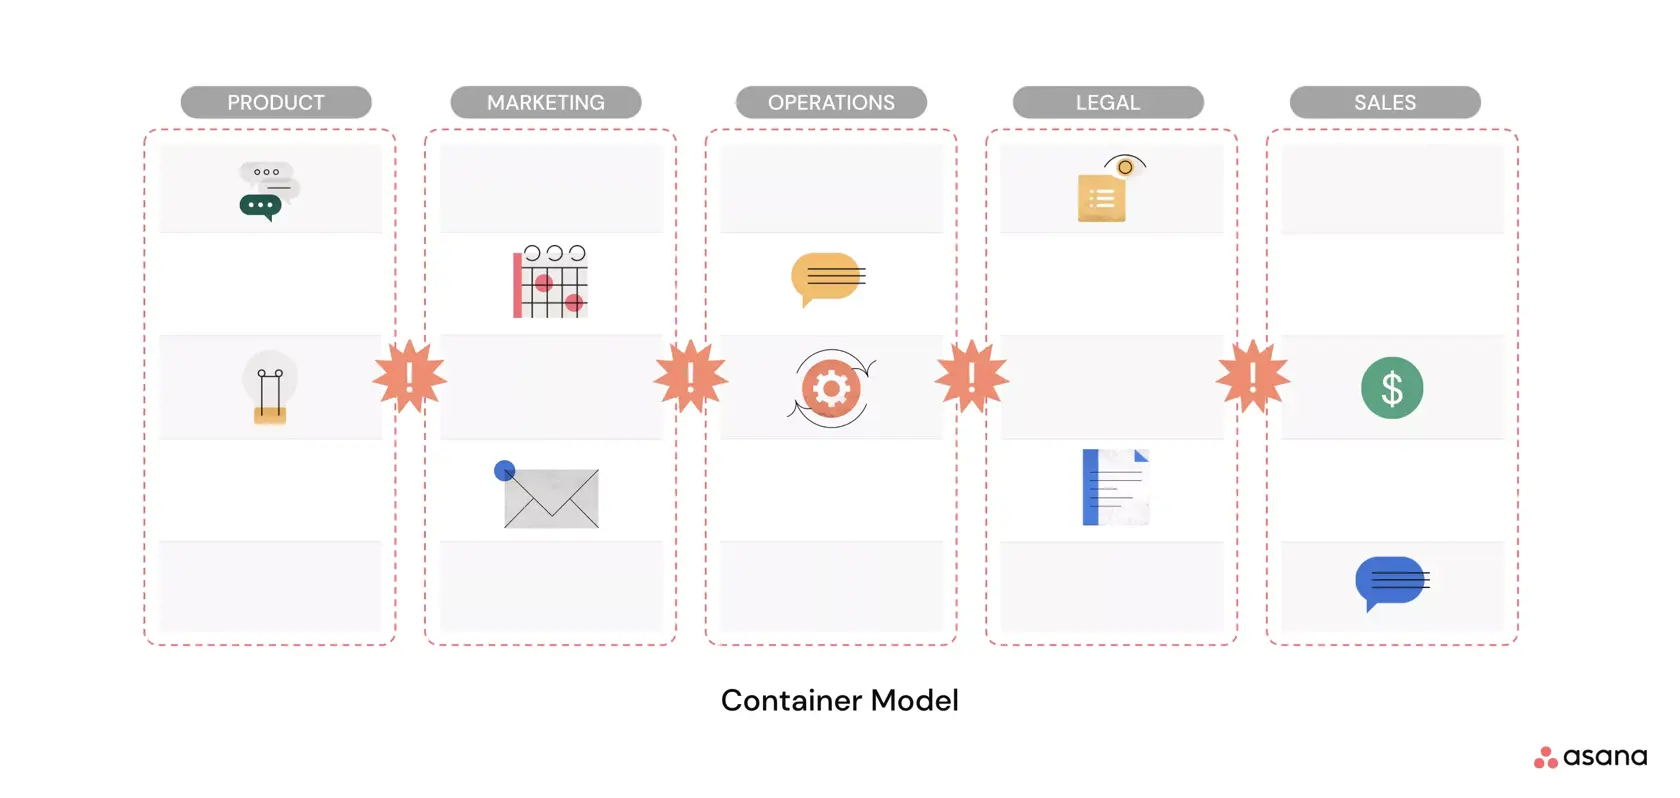 The Container Model